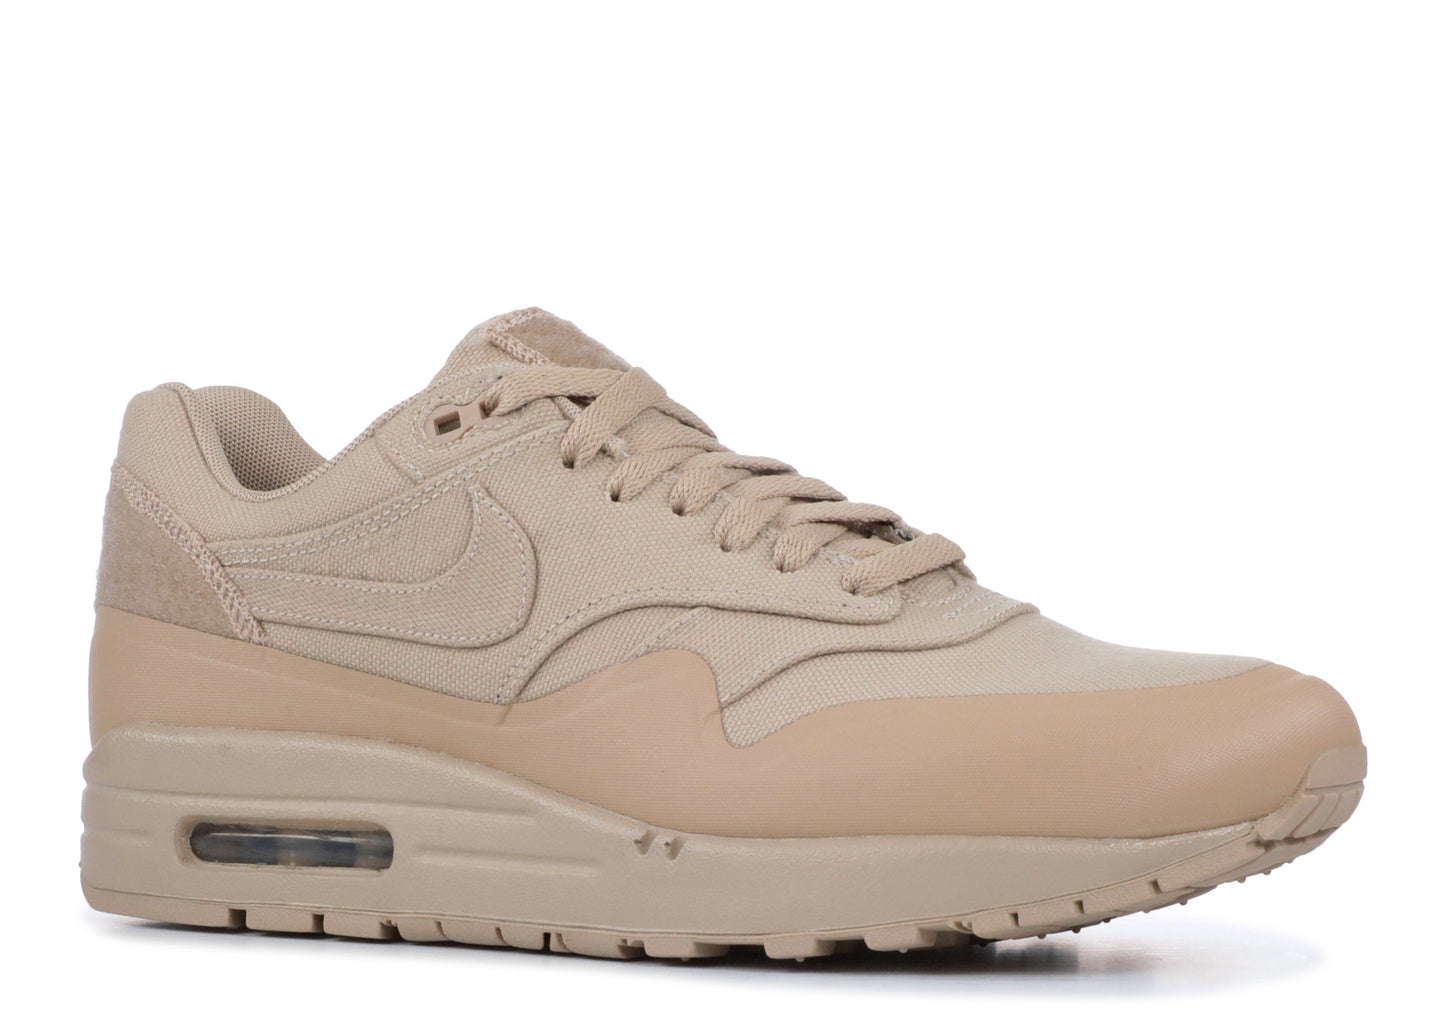 Nike Air Max 1 Velcro SP Patch "Sand"